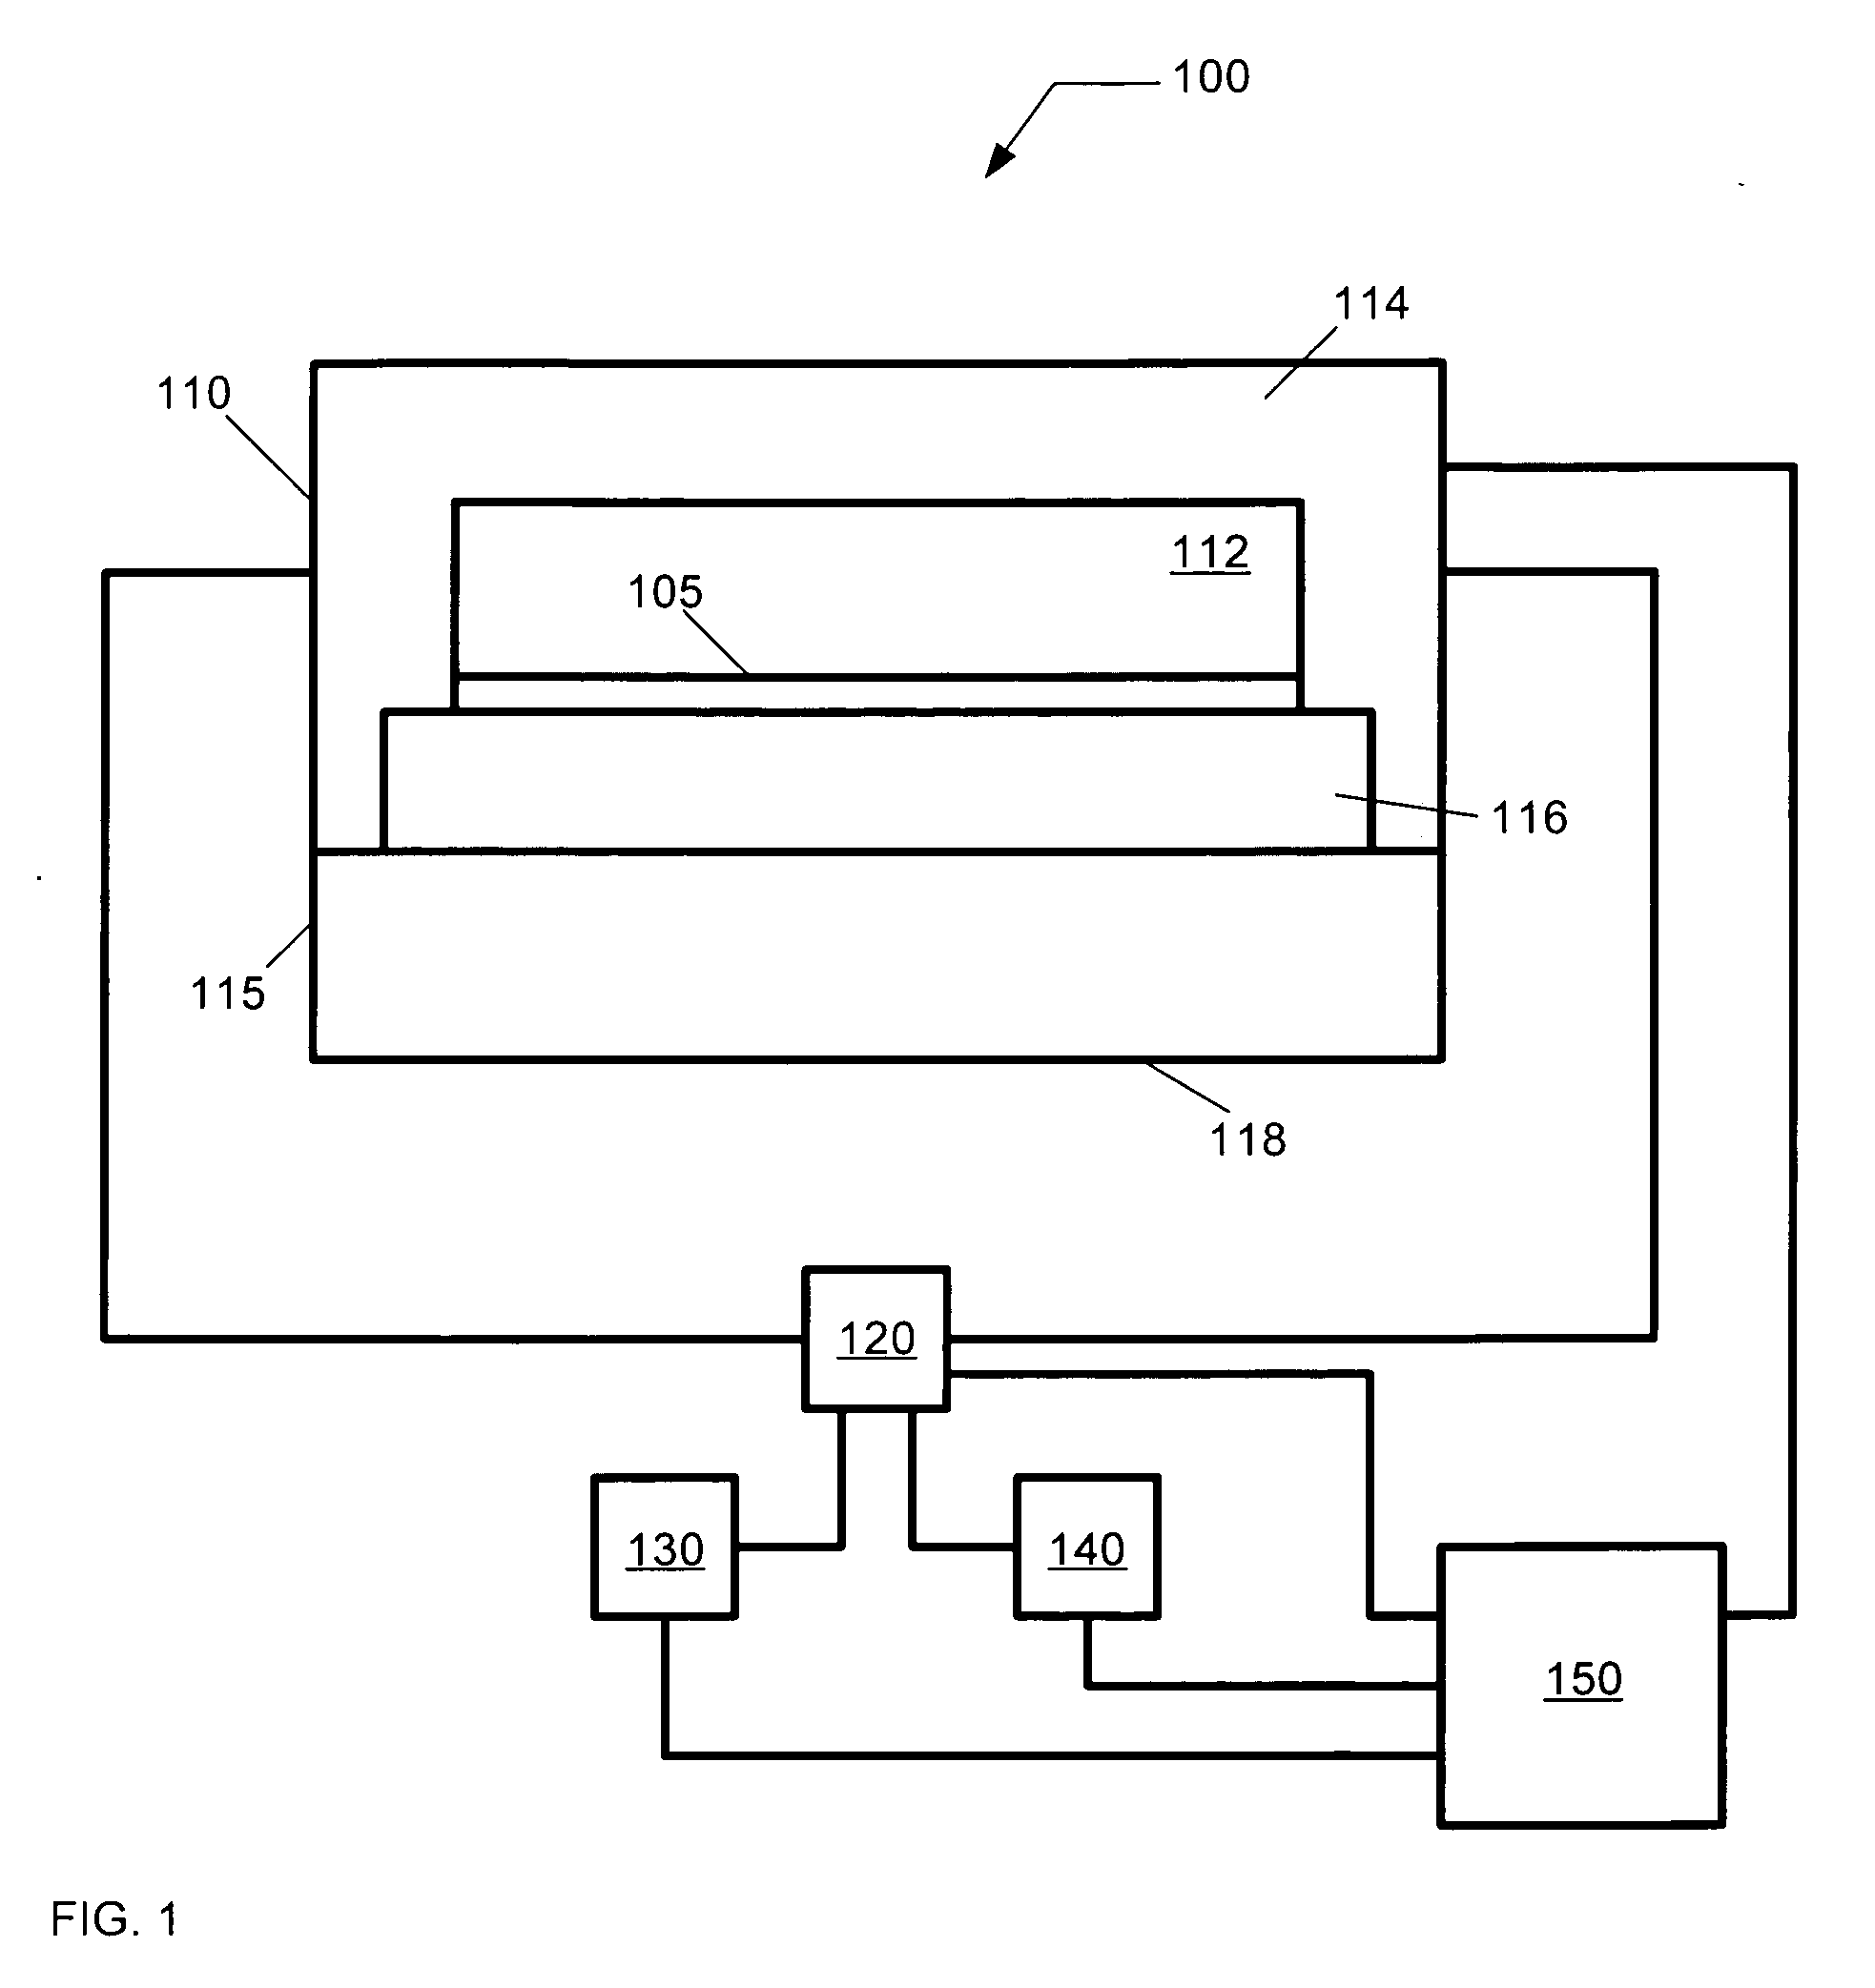 Supercritical fluid processing system having a coating on internal members and a method of using